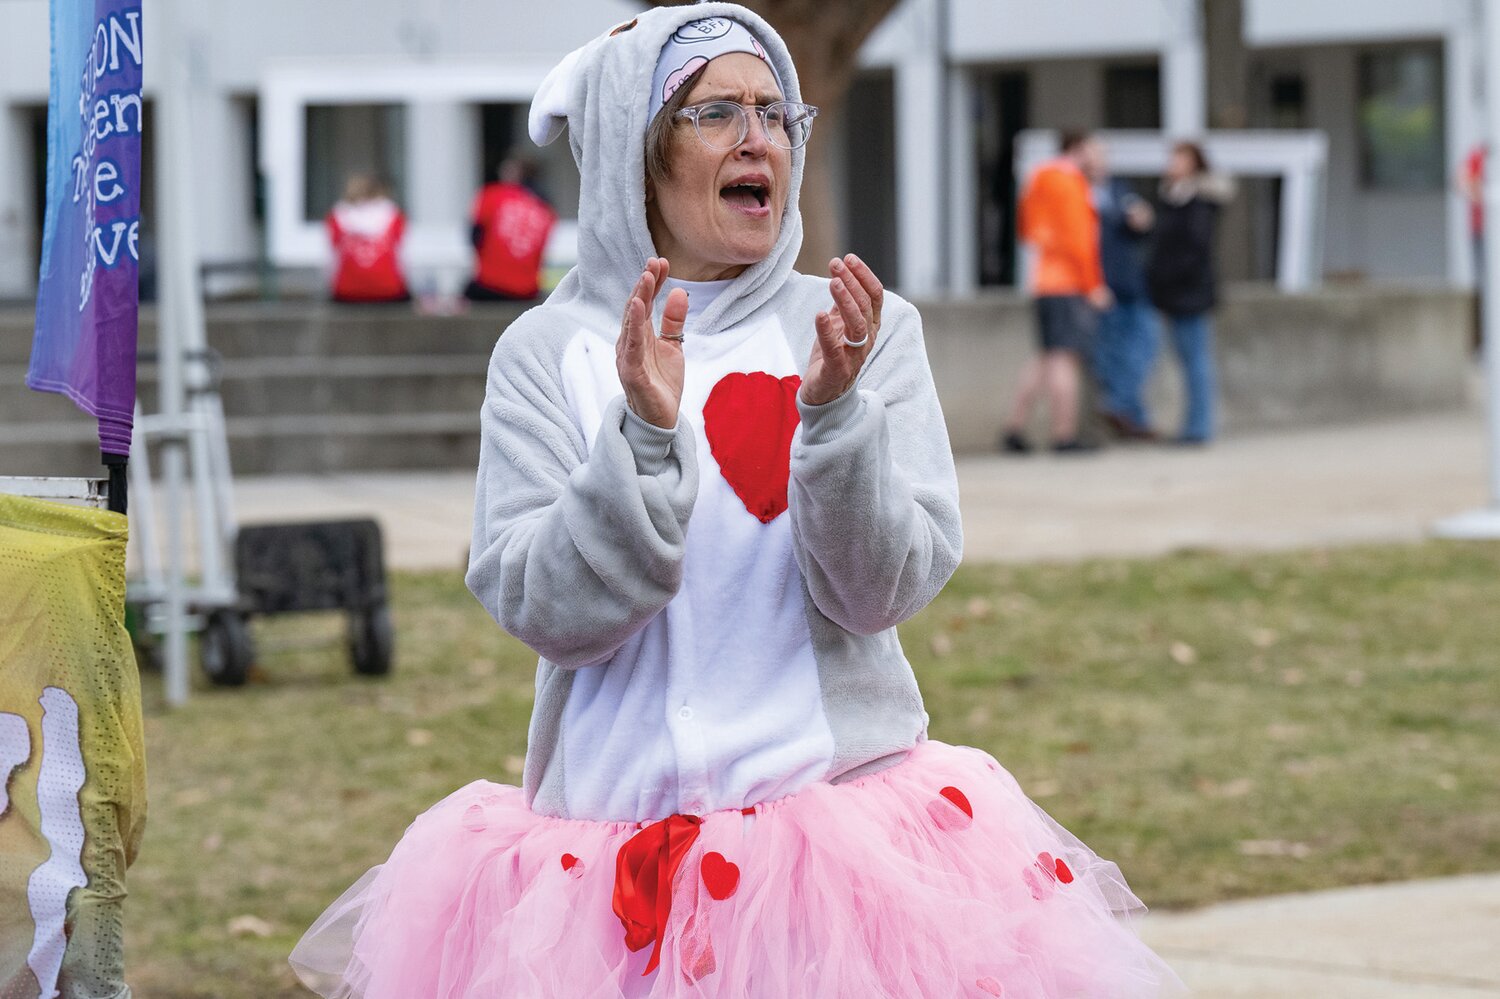 Jamie Bubeck, of King of Prussia, cheers on the many walkers and runners making their way to the finish line during the Great Cupid Run, an event hosted by Scoogie Events.